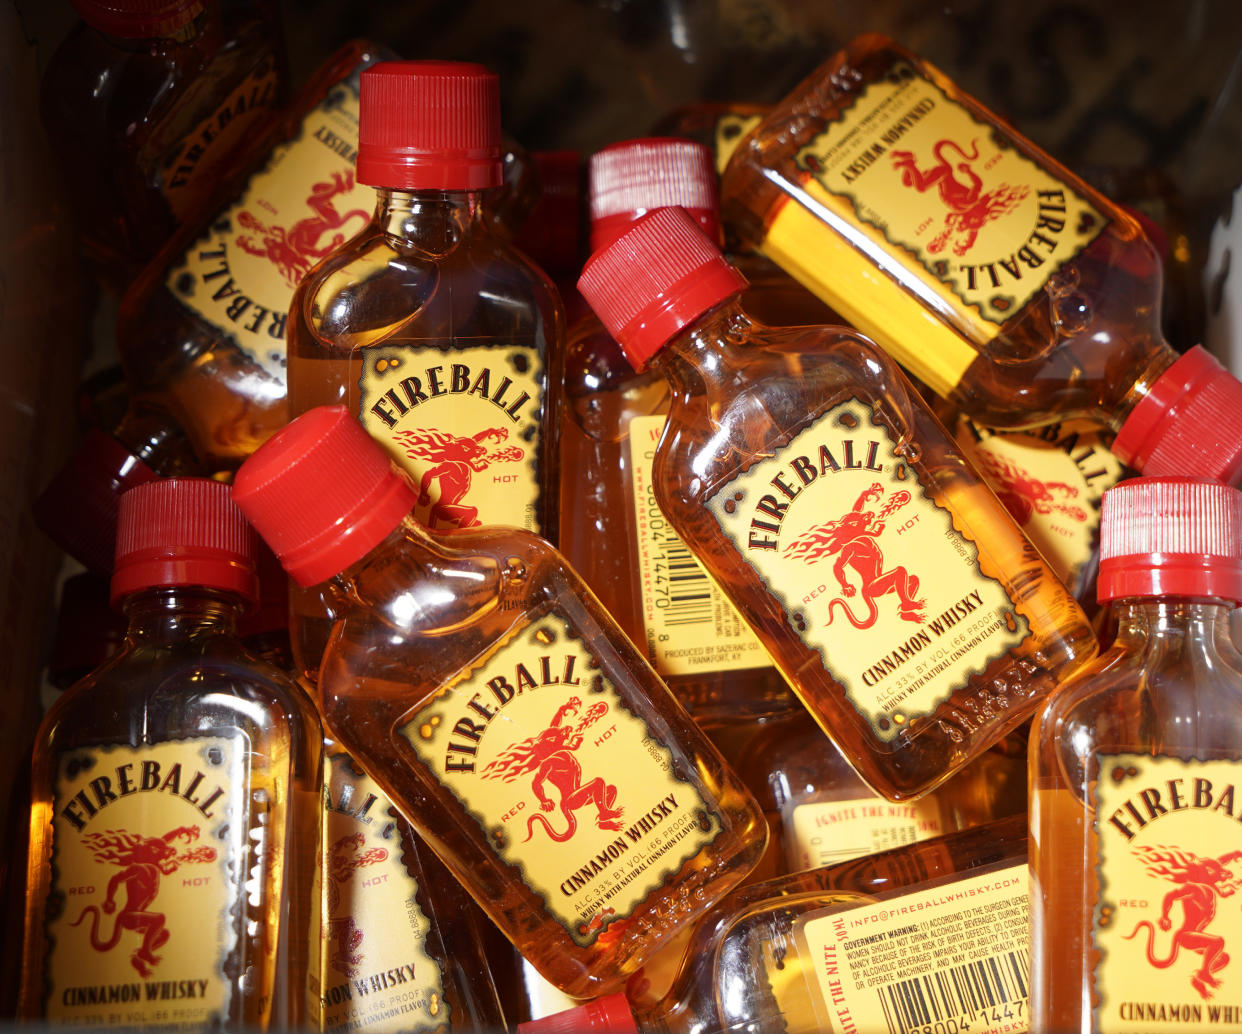 A middle school student in South Carolina stole numerous mini-bottles of Fireball whiskey from his grandfather and proceeded to get drunk at school. (Staff Photo by Gregory Rec/Staff Photographer)